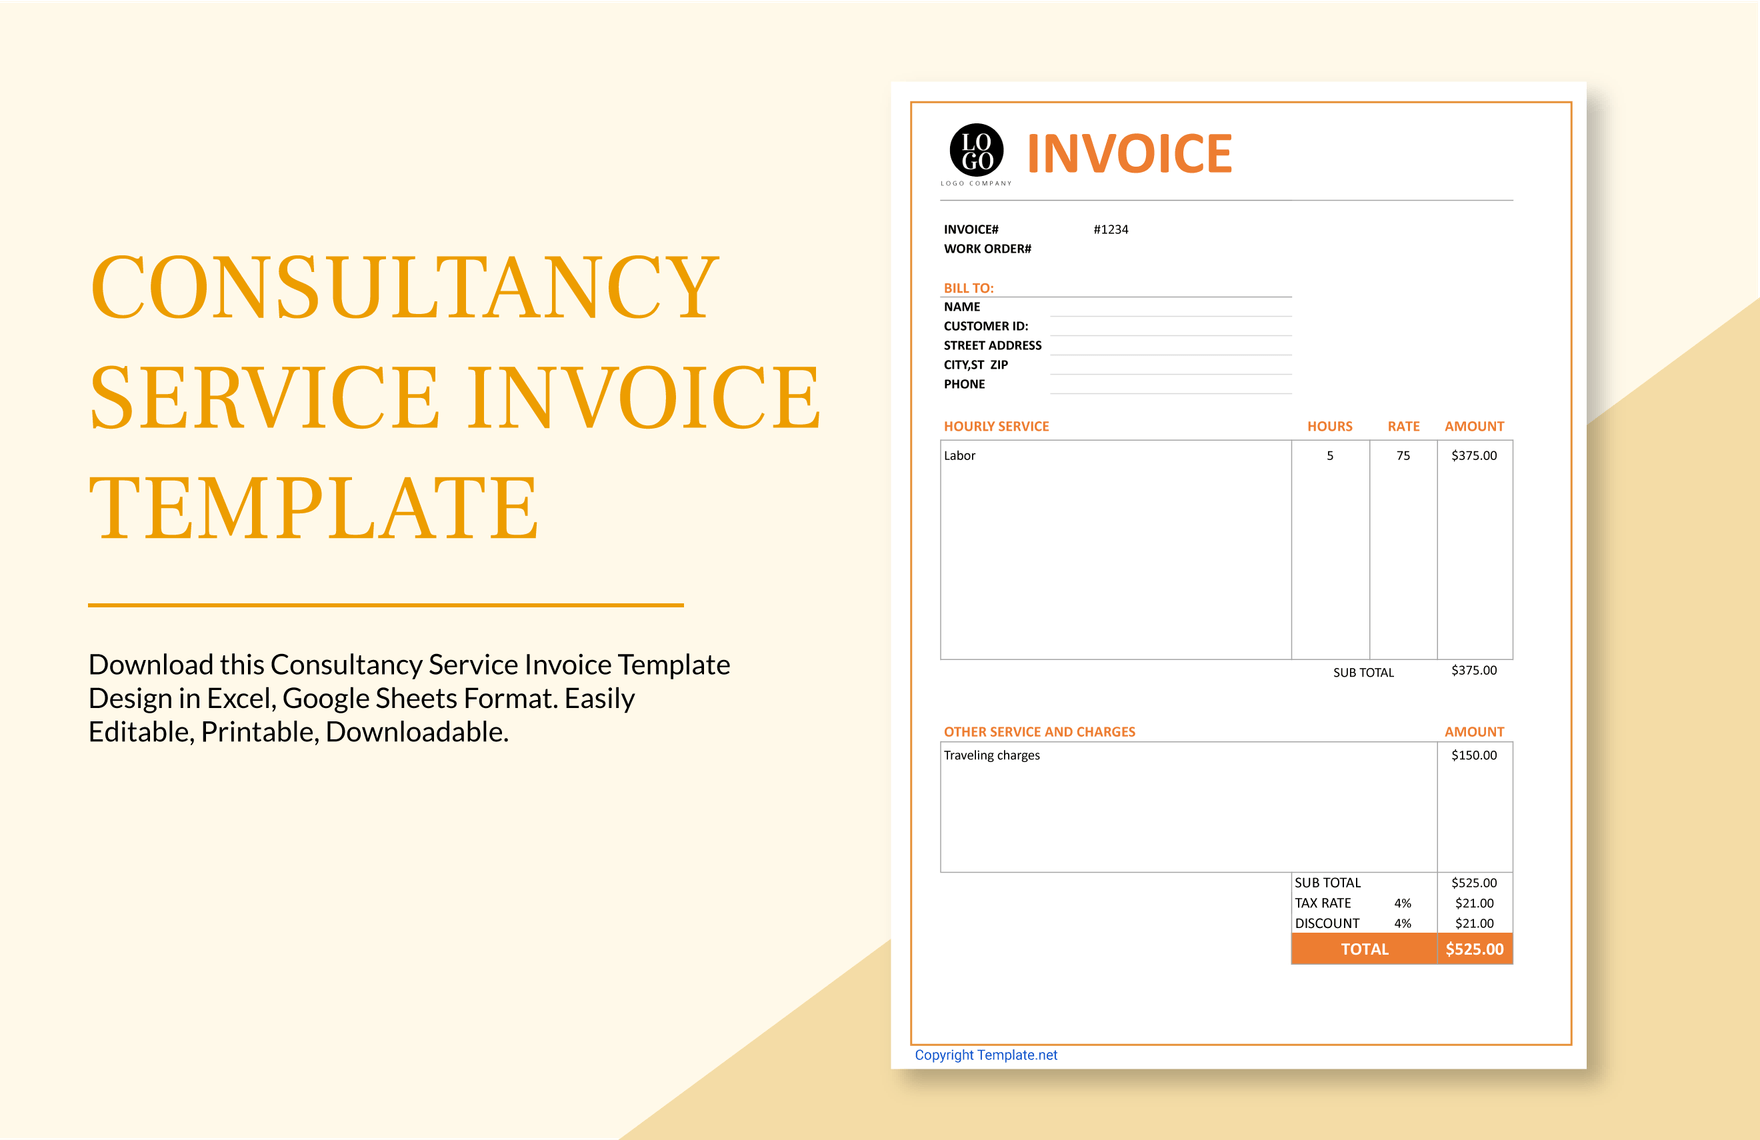 Consultancy Service Invoice Template in Word, Google Docs, Excel, Google Sheets, Apple Pages, Apple Numbers